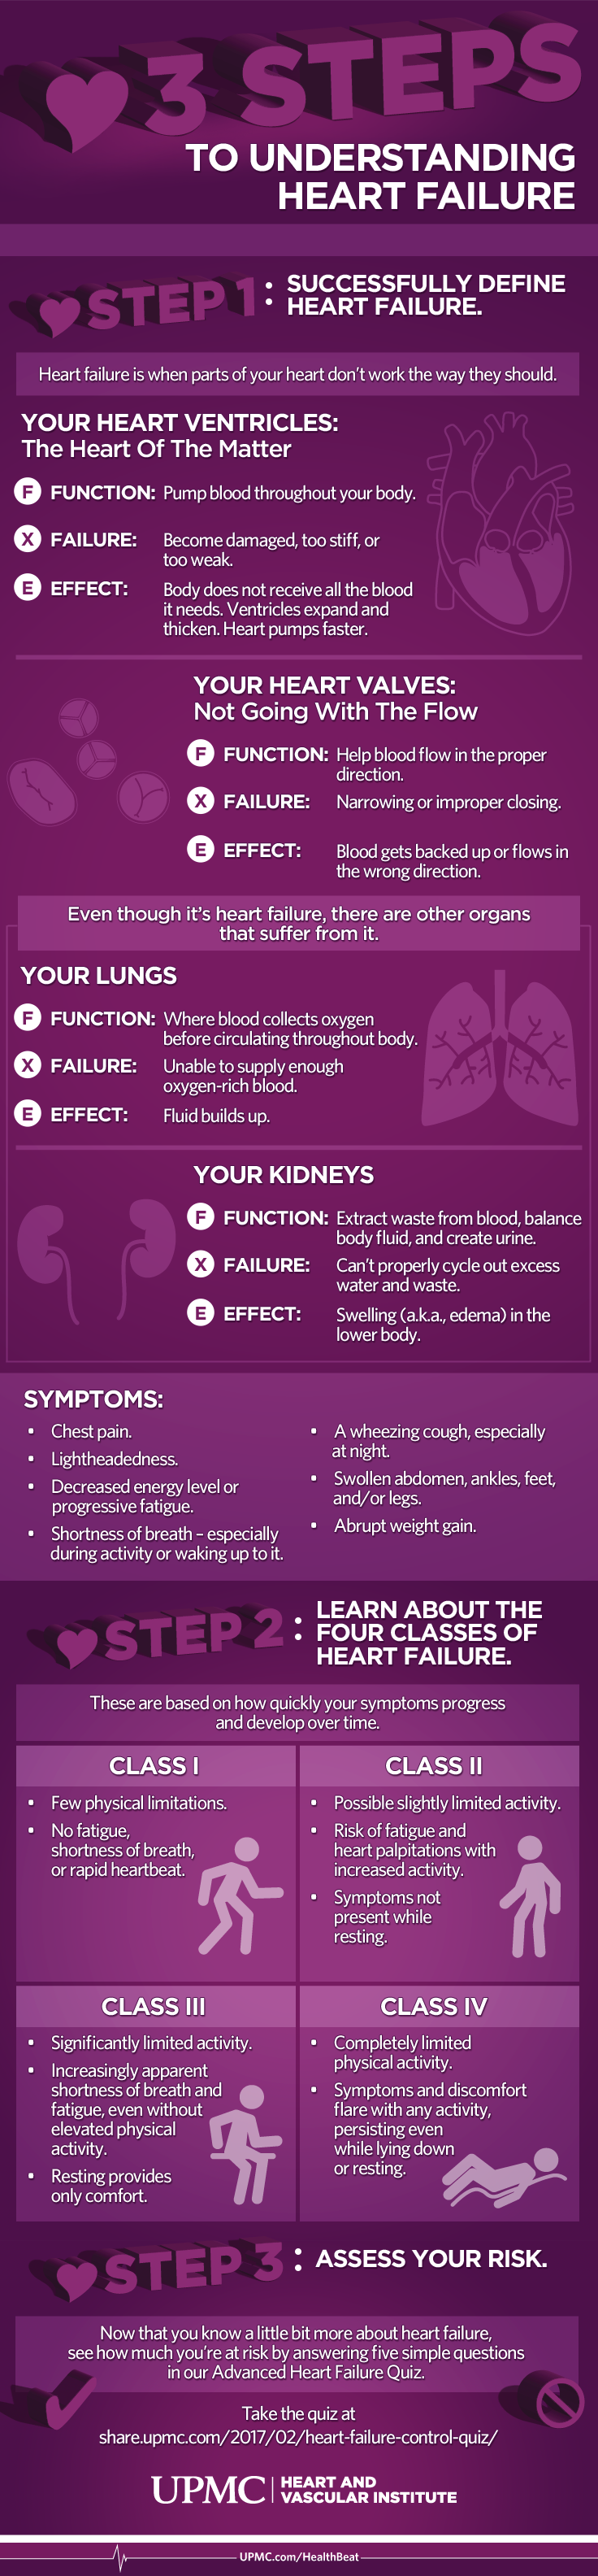 Learn more about how heart failure affects the body with this infographic 